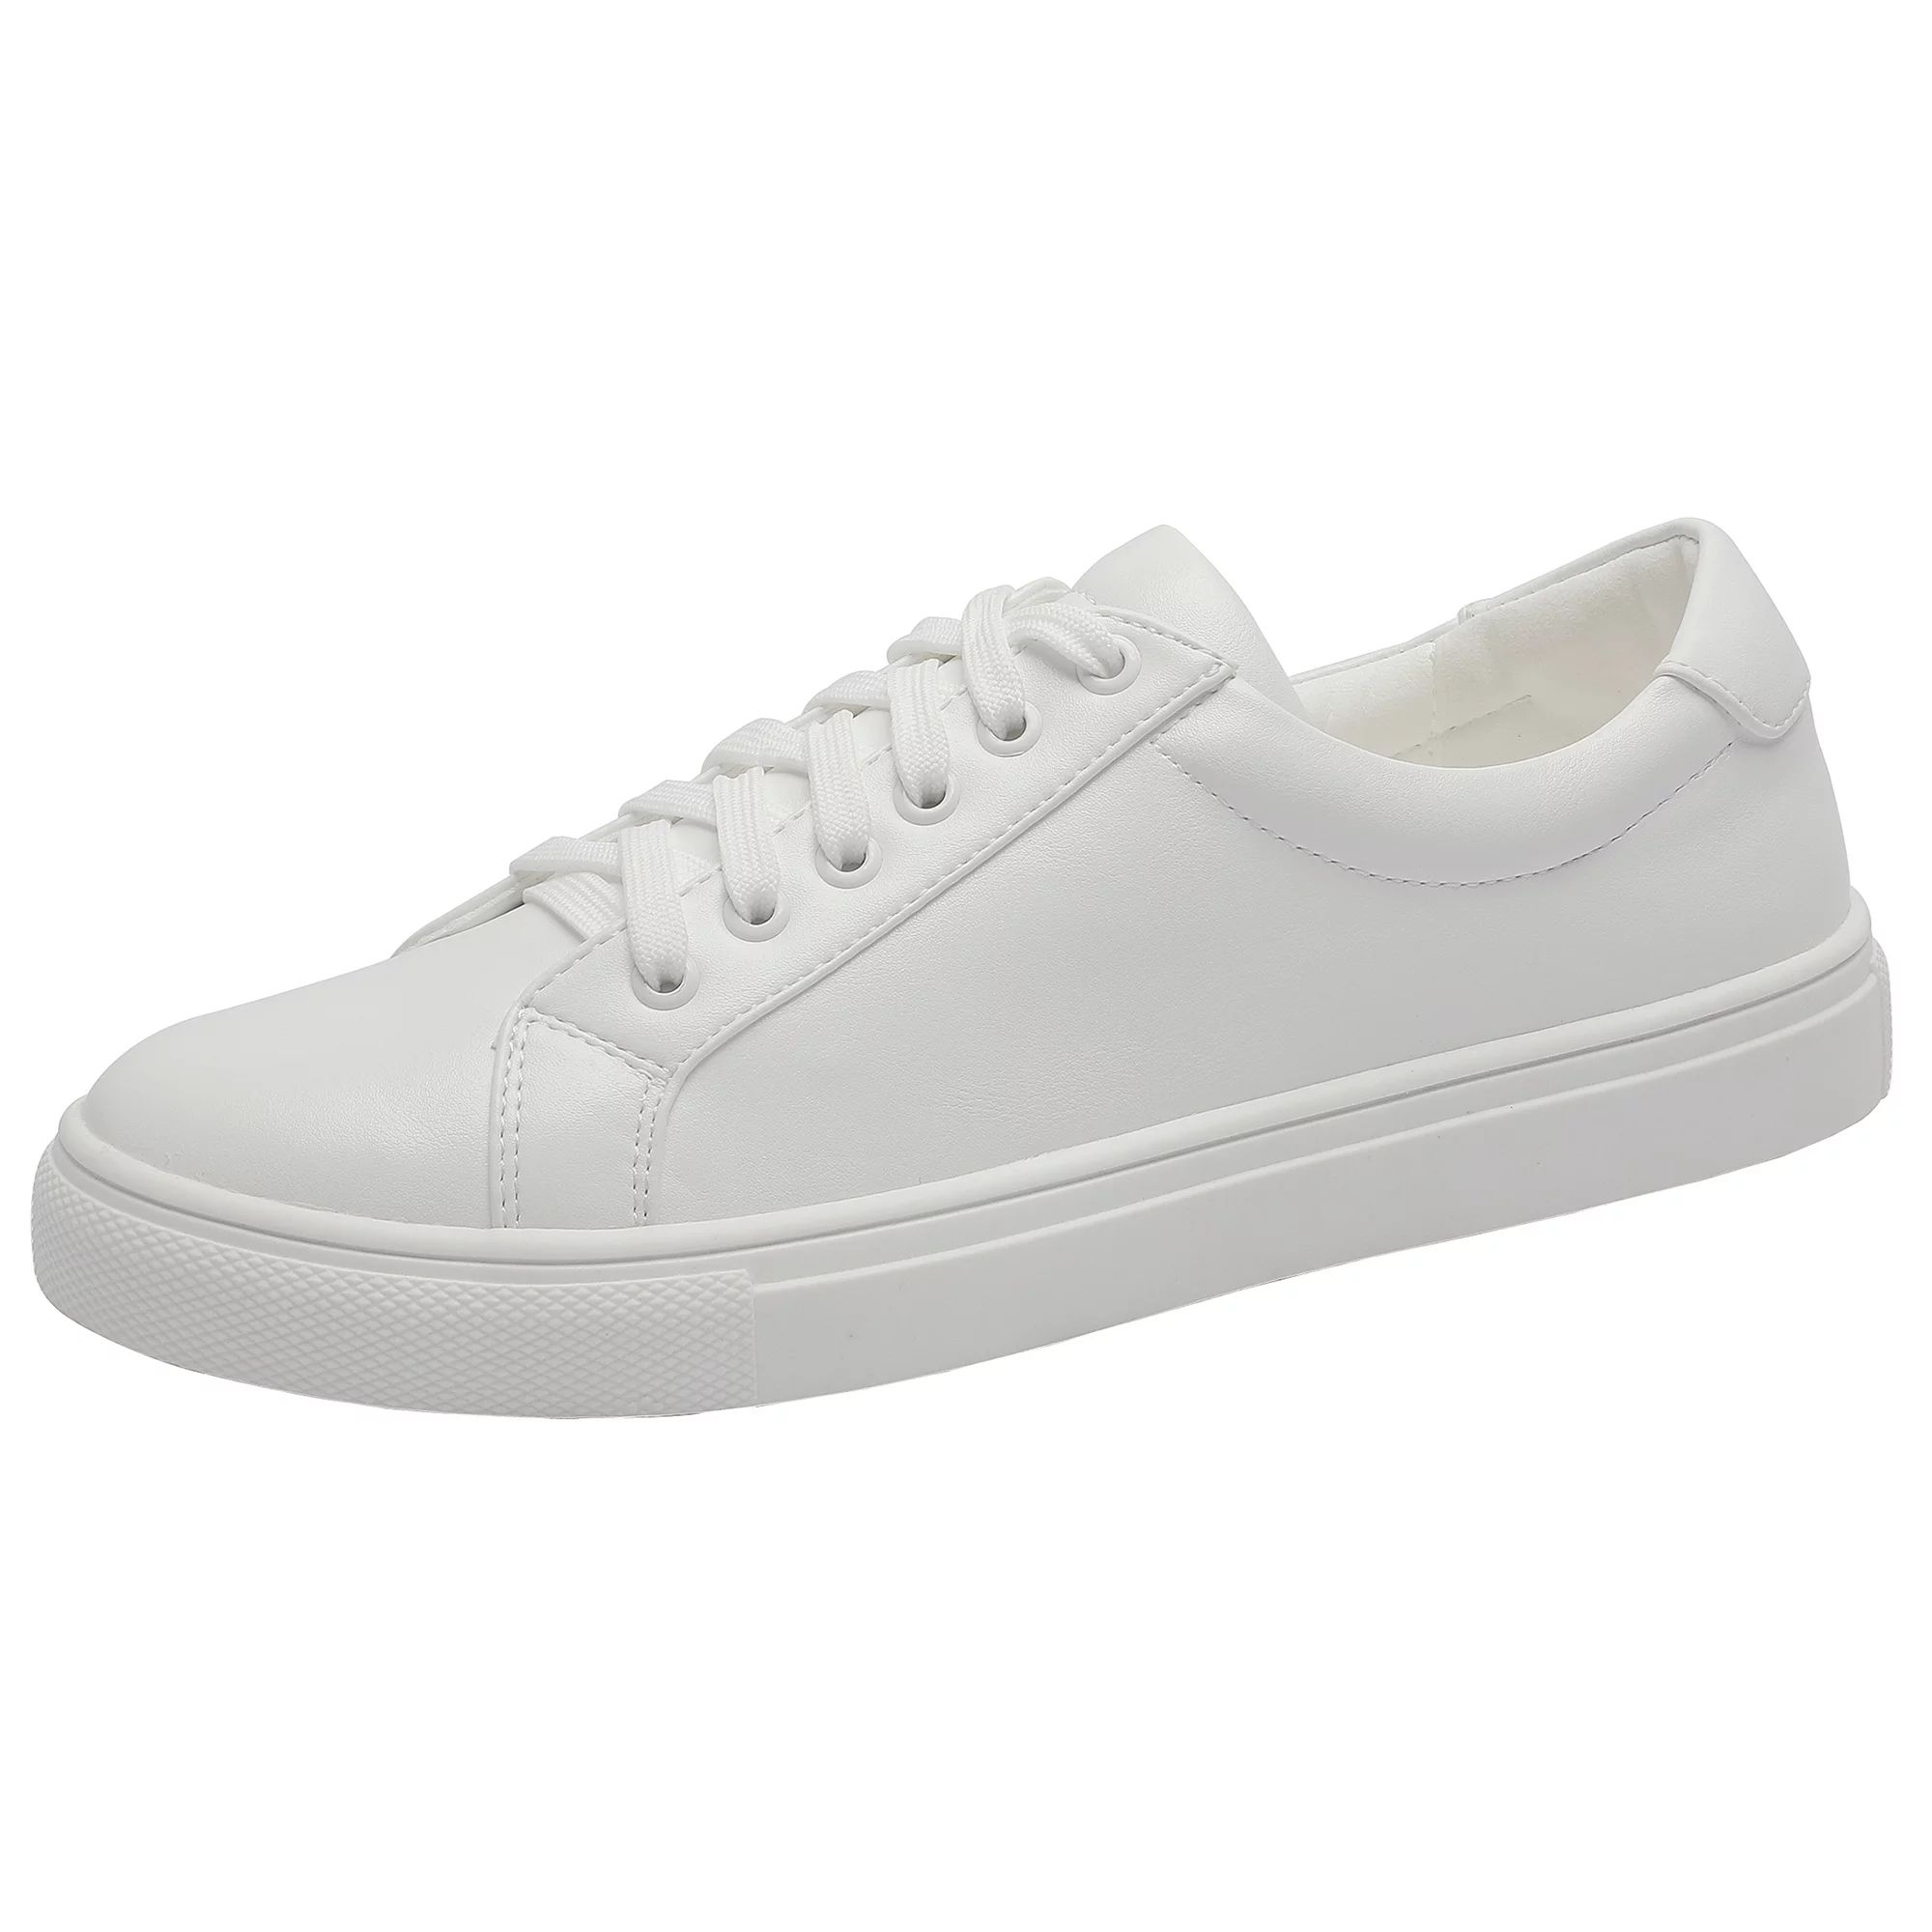 Woman Fashion Pure White Sneakers Casual Lace up Flat Shoes Low Top for Female 10 | Walmart (US)